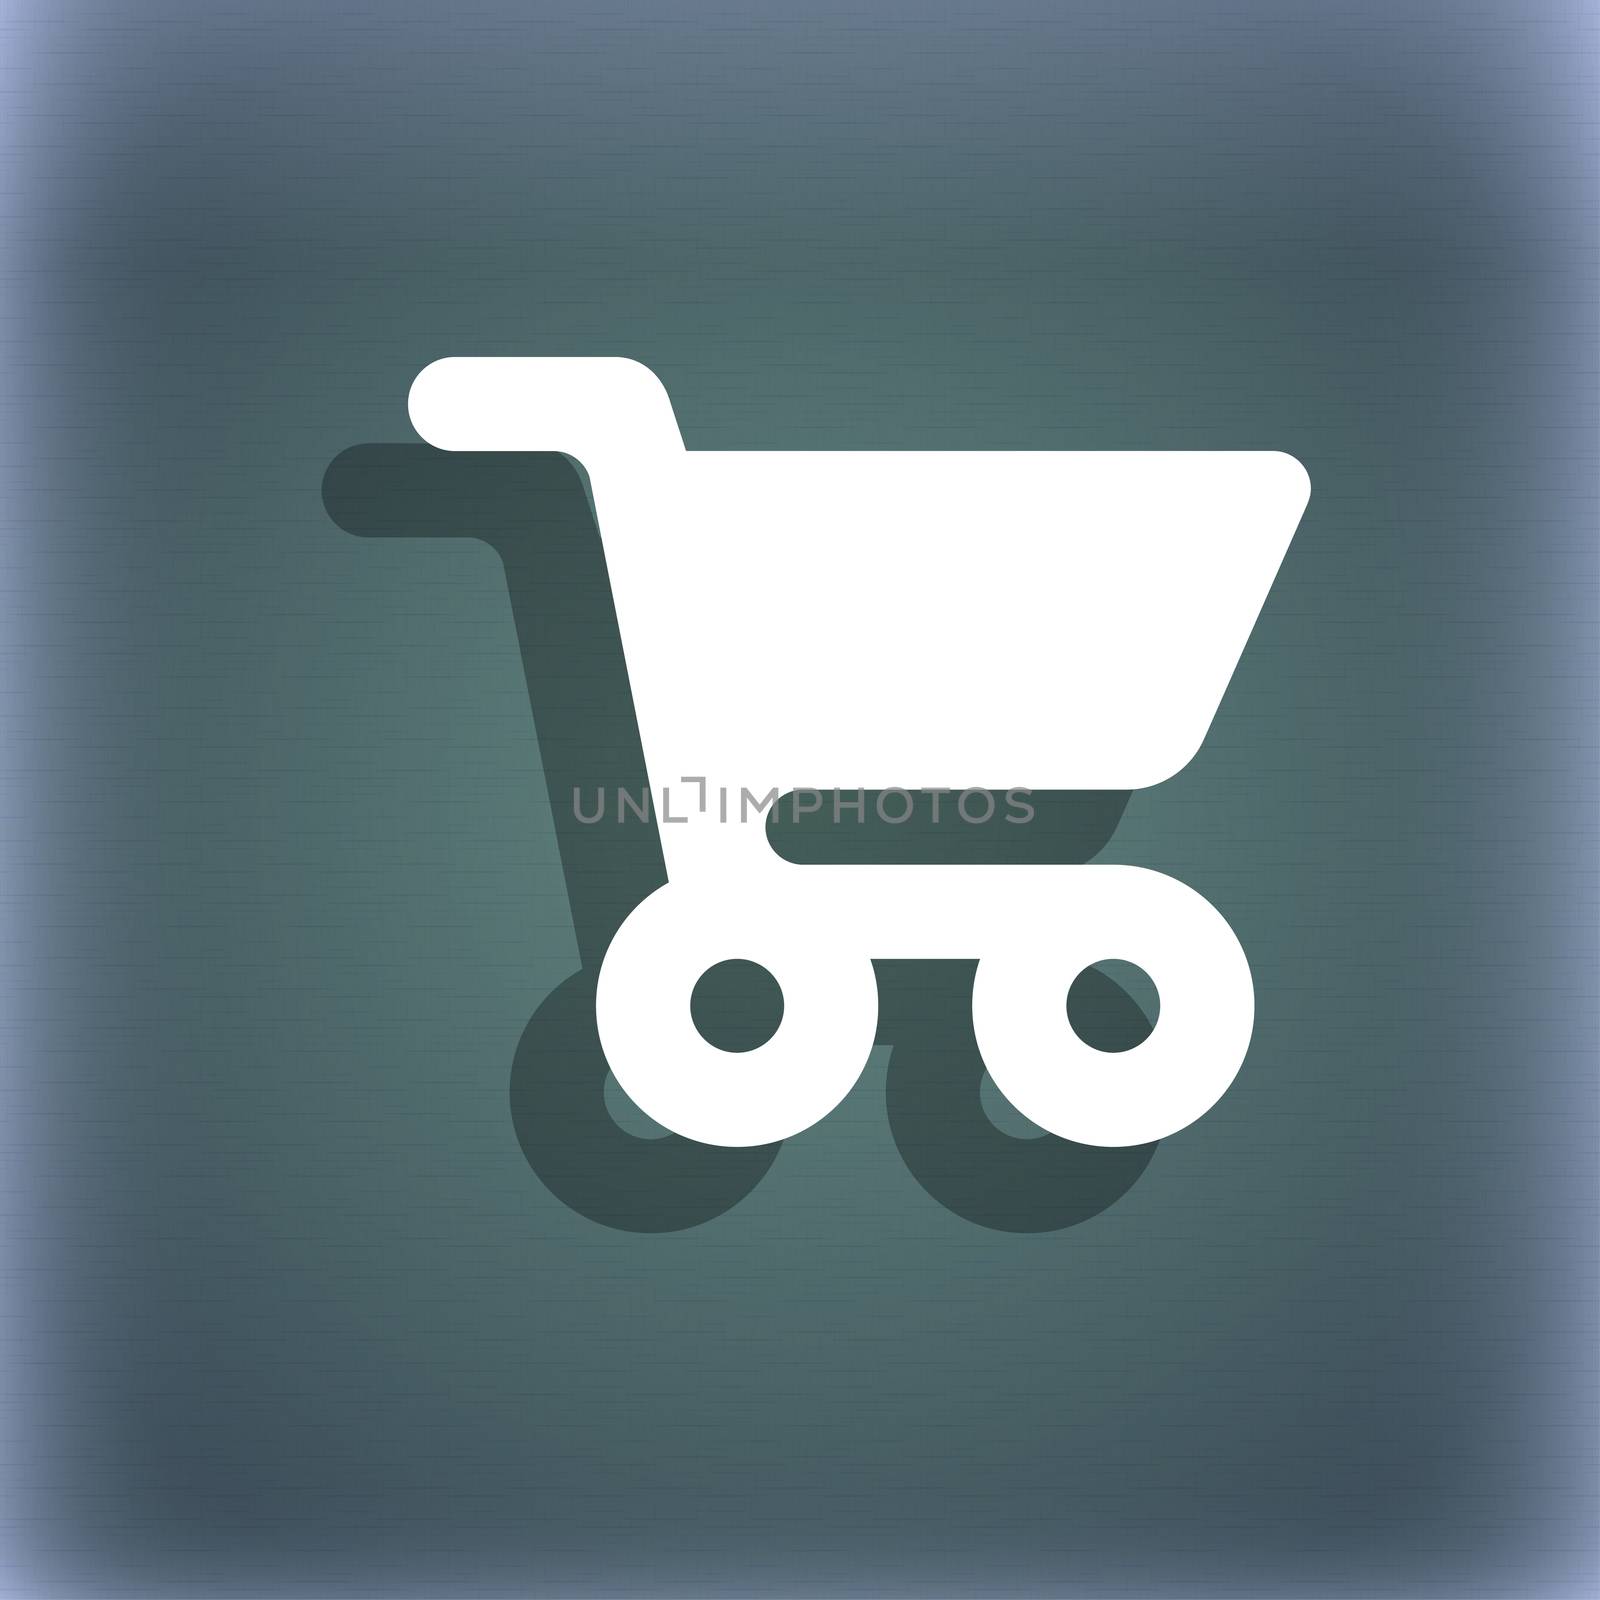 shopping basket icon symbol on the blue-green abstract background with shadow and space for your text. illustration